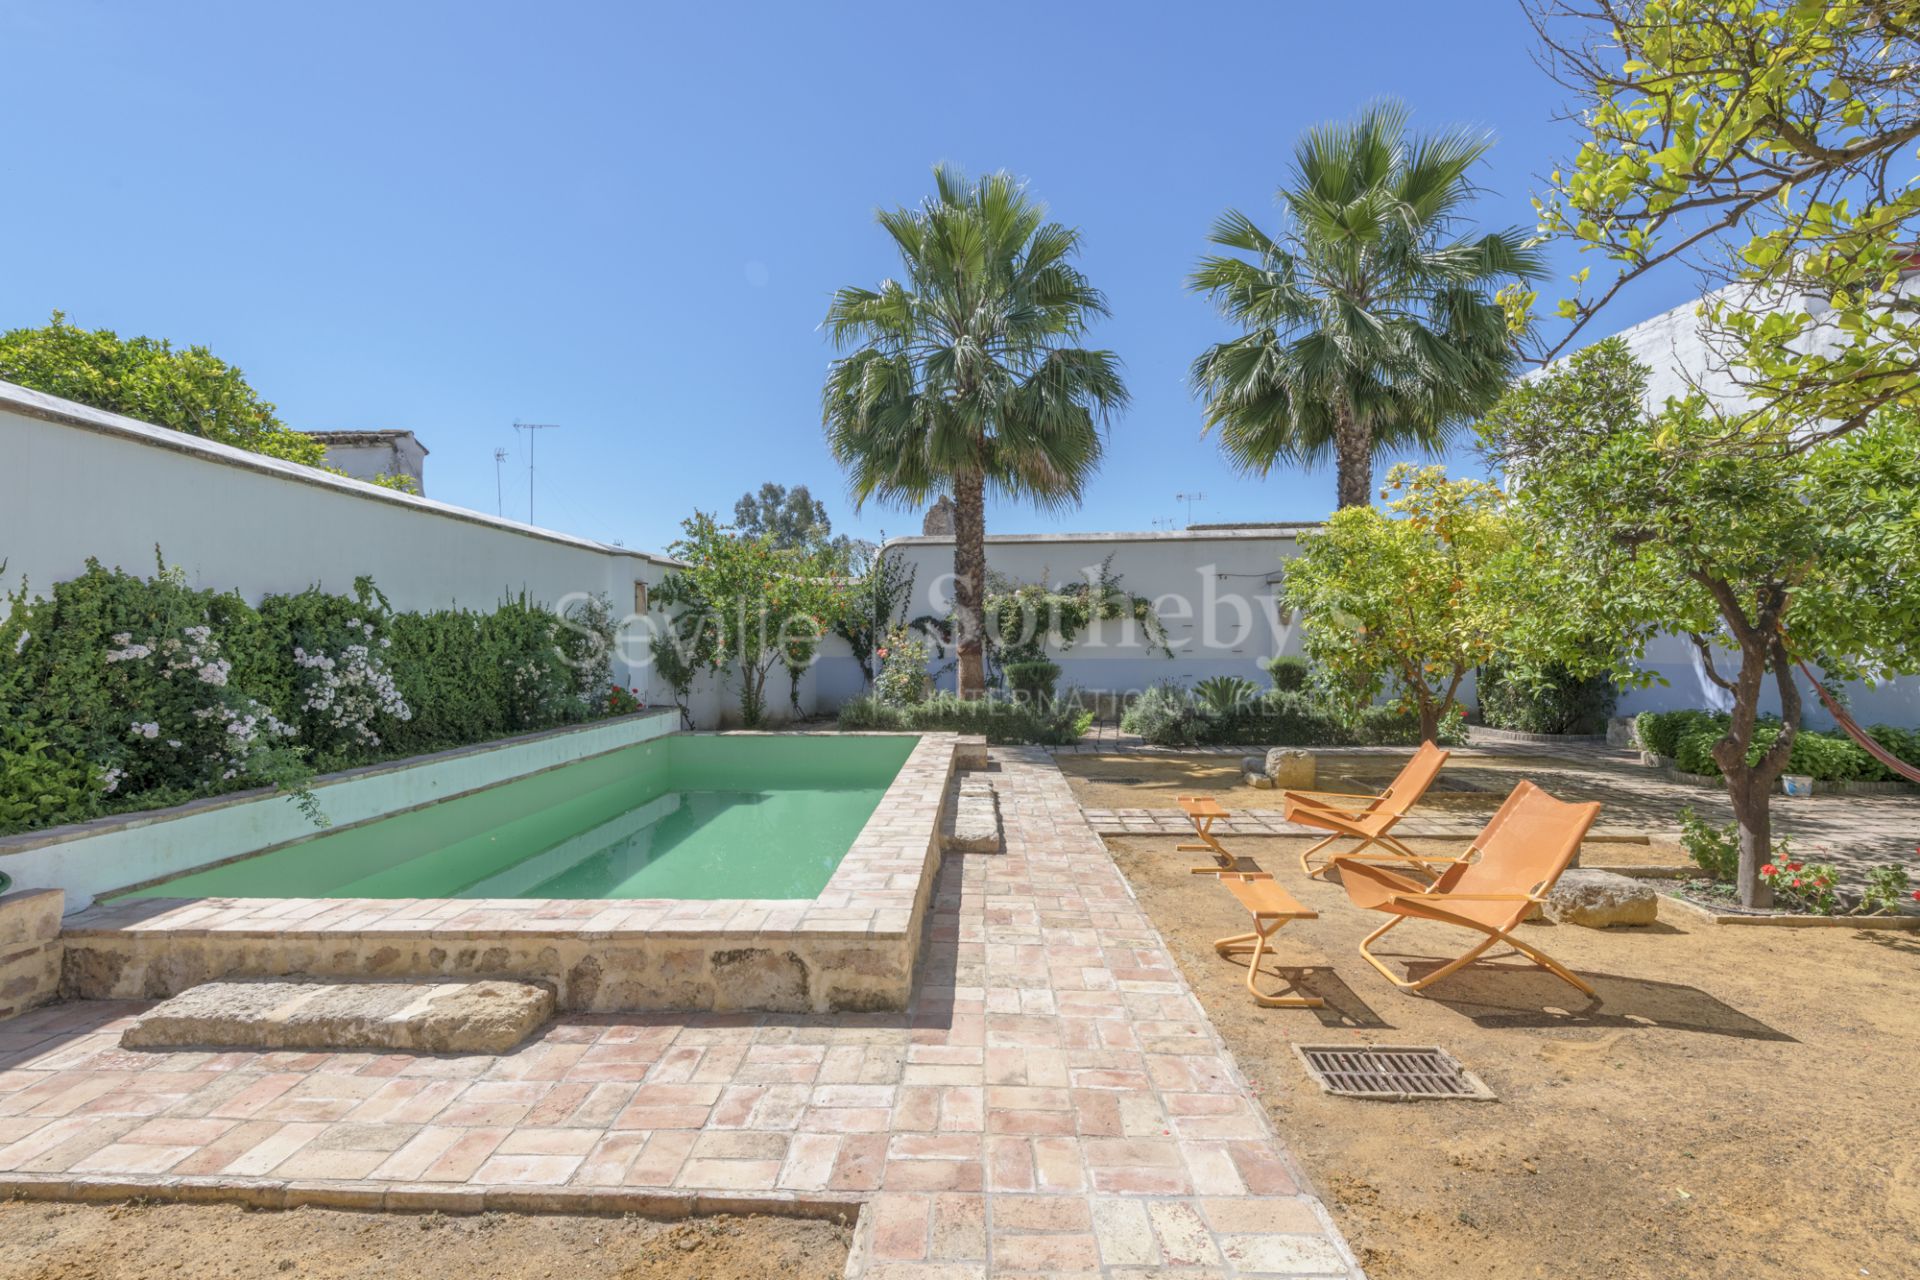 House decorated by Jaime Parladé with private swimming pool. Short term rental.